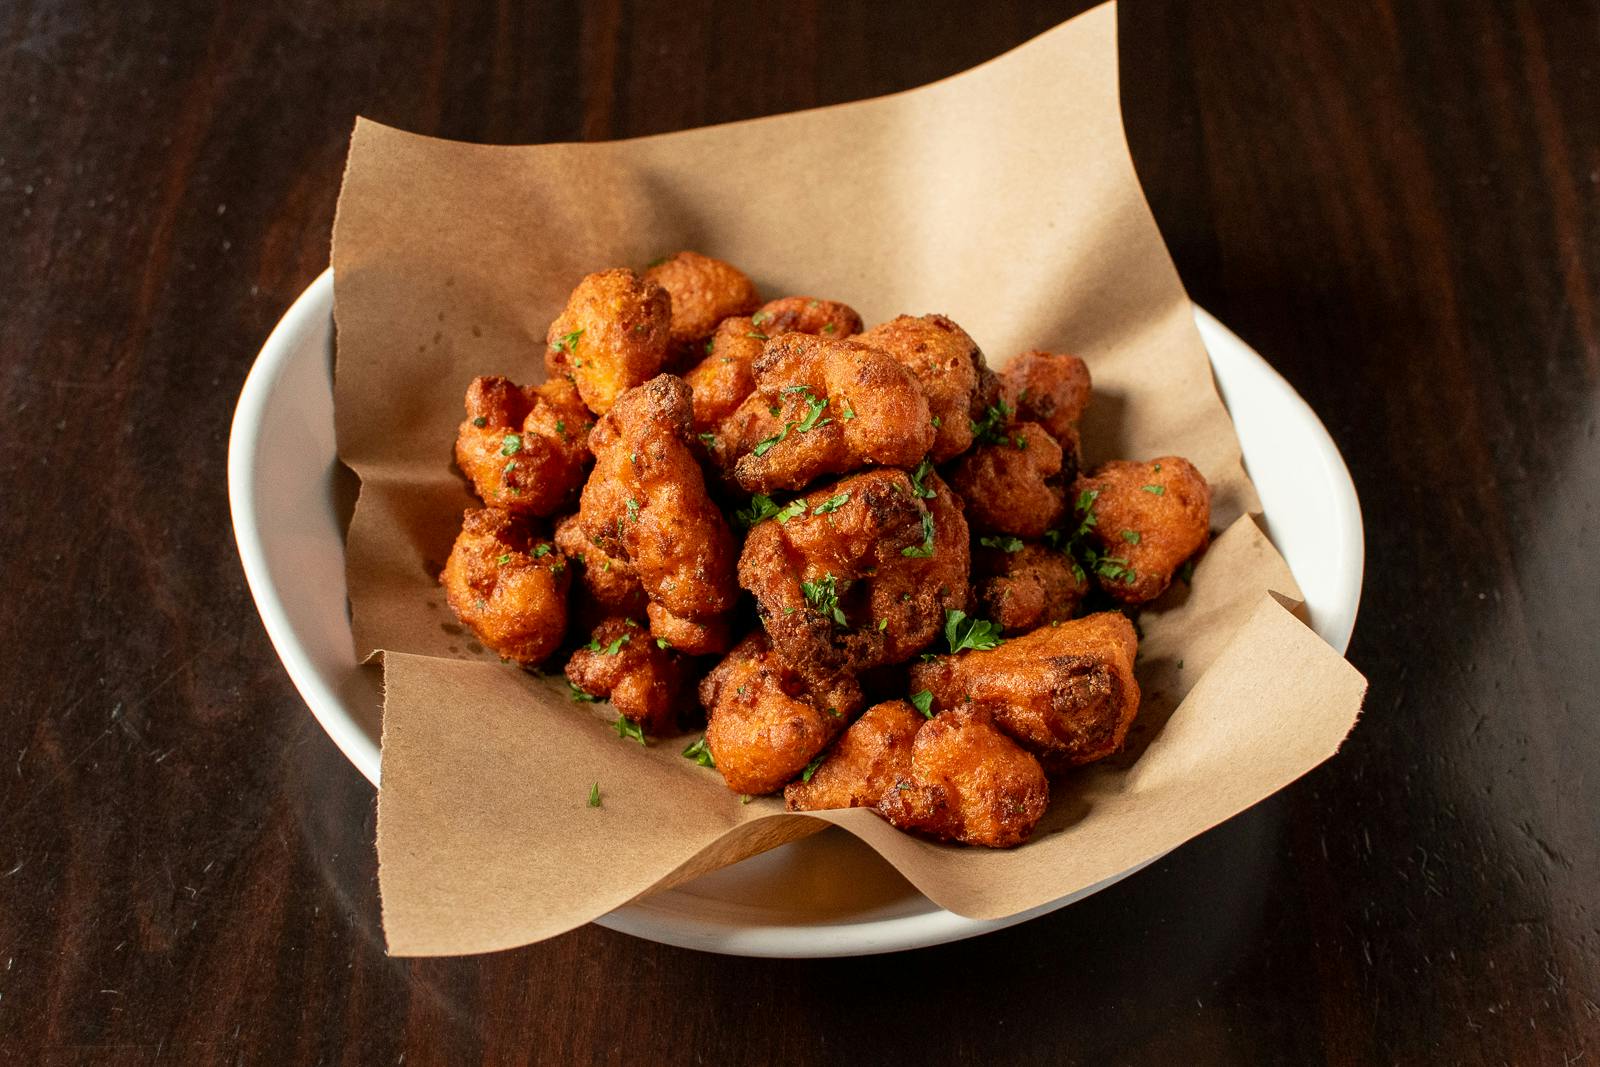 Cauliflower Bites from Midcoast Wings - Downtown Madison in Madison, WI